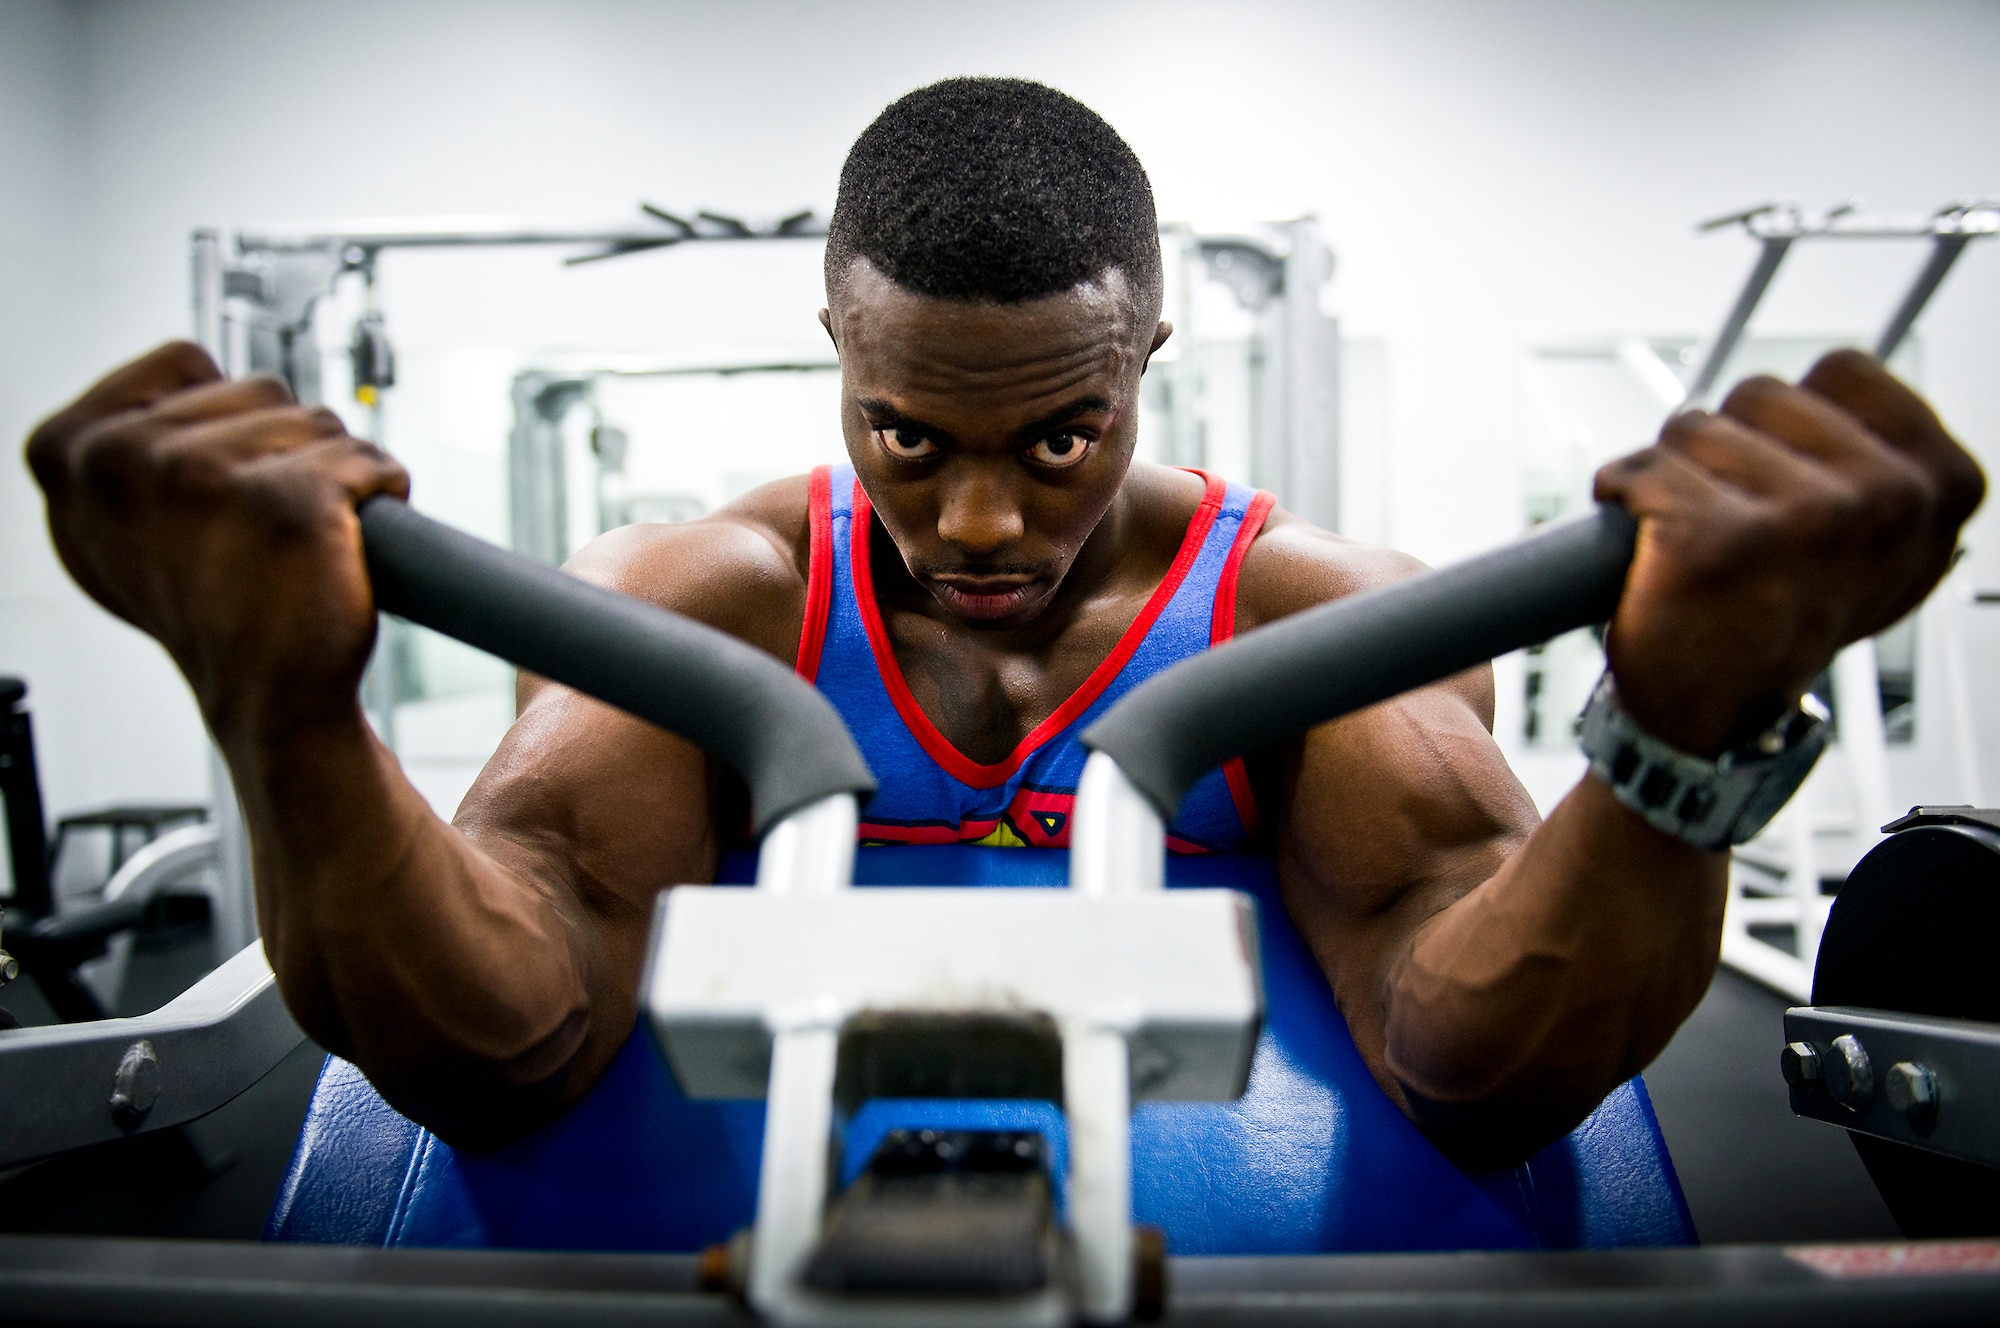 Senior Airman Terrence Ruffin, 16th Electronic Warfare Squadron, lifts weights at the fitness center on Eglin Air Force Base, Fla.  In November, the Airman became the youngest professional bodybuilder on the circuit at age 21.  (U.S. Air Force photo/Samuel King Jr.)